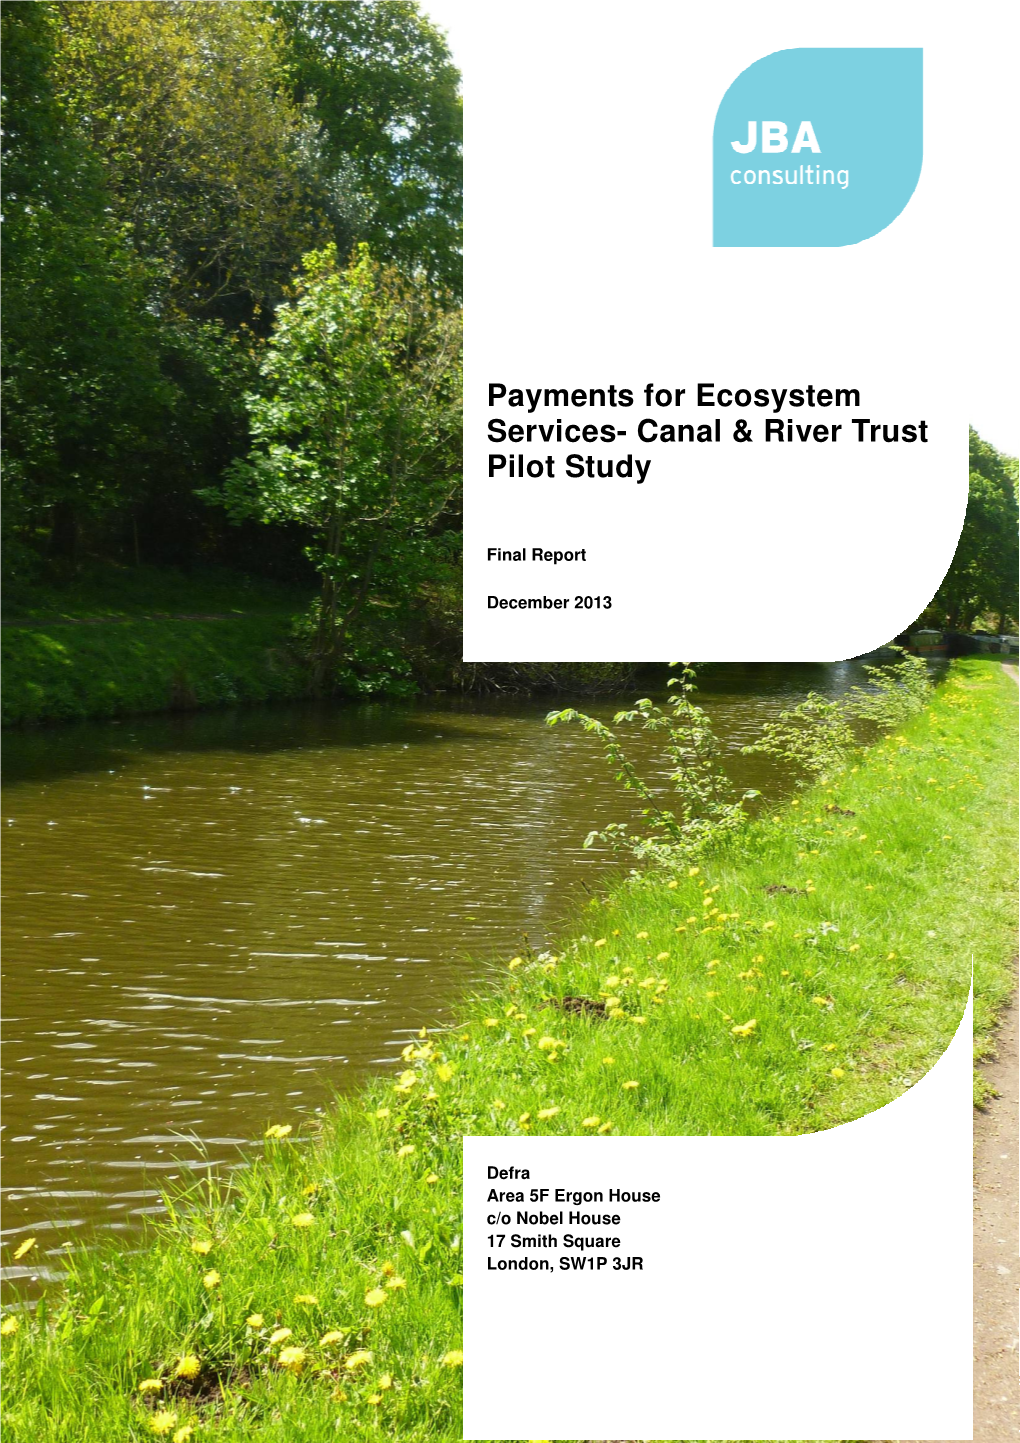 Payments for Ecosystem Services- Canal & River Trust Pilot Study